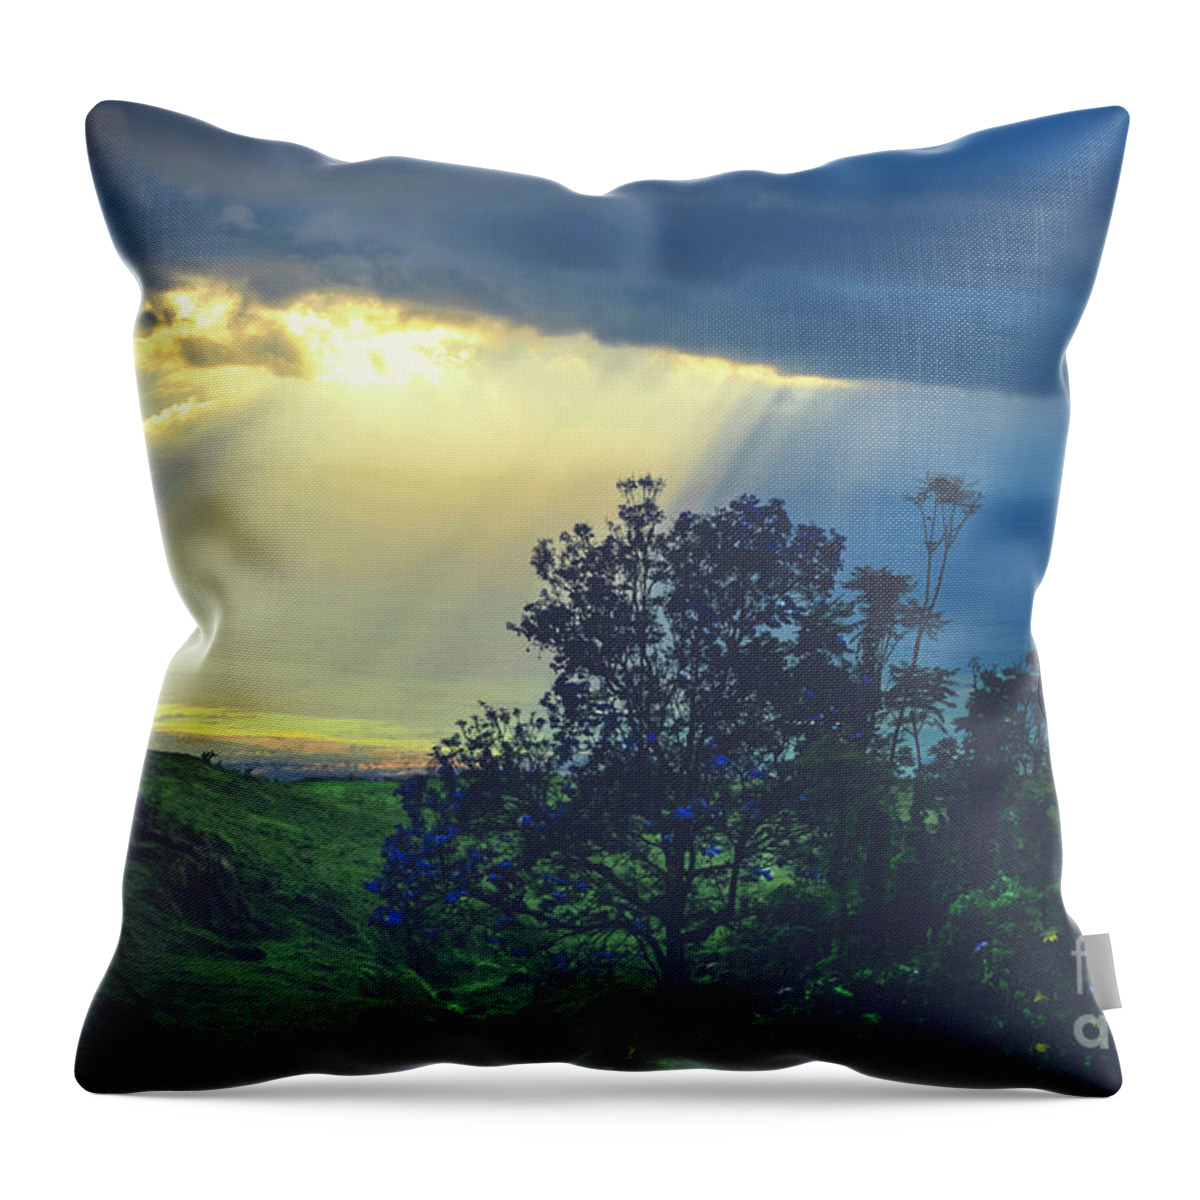 Dream Of Mortal Bliss Throw Pillow featuring the photograph Dream of Mortal Bliss by Sharon Mau